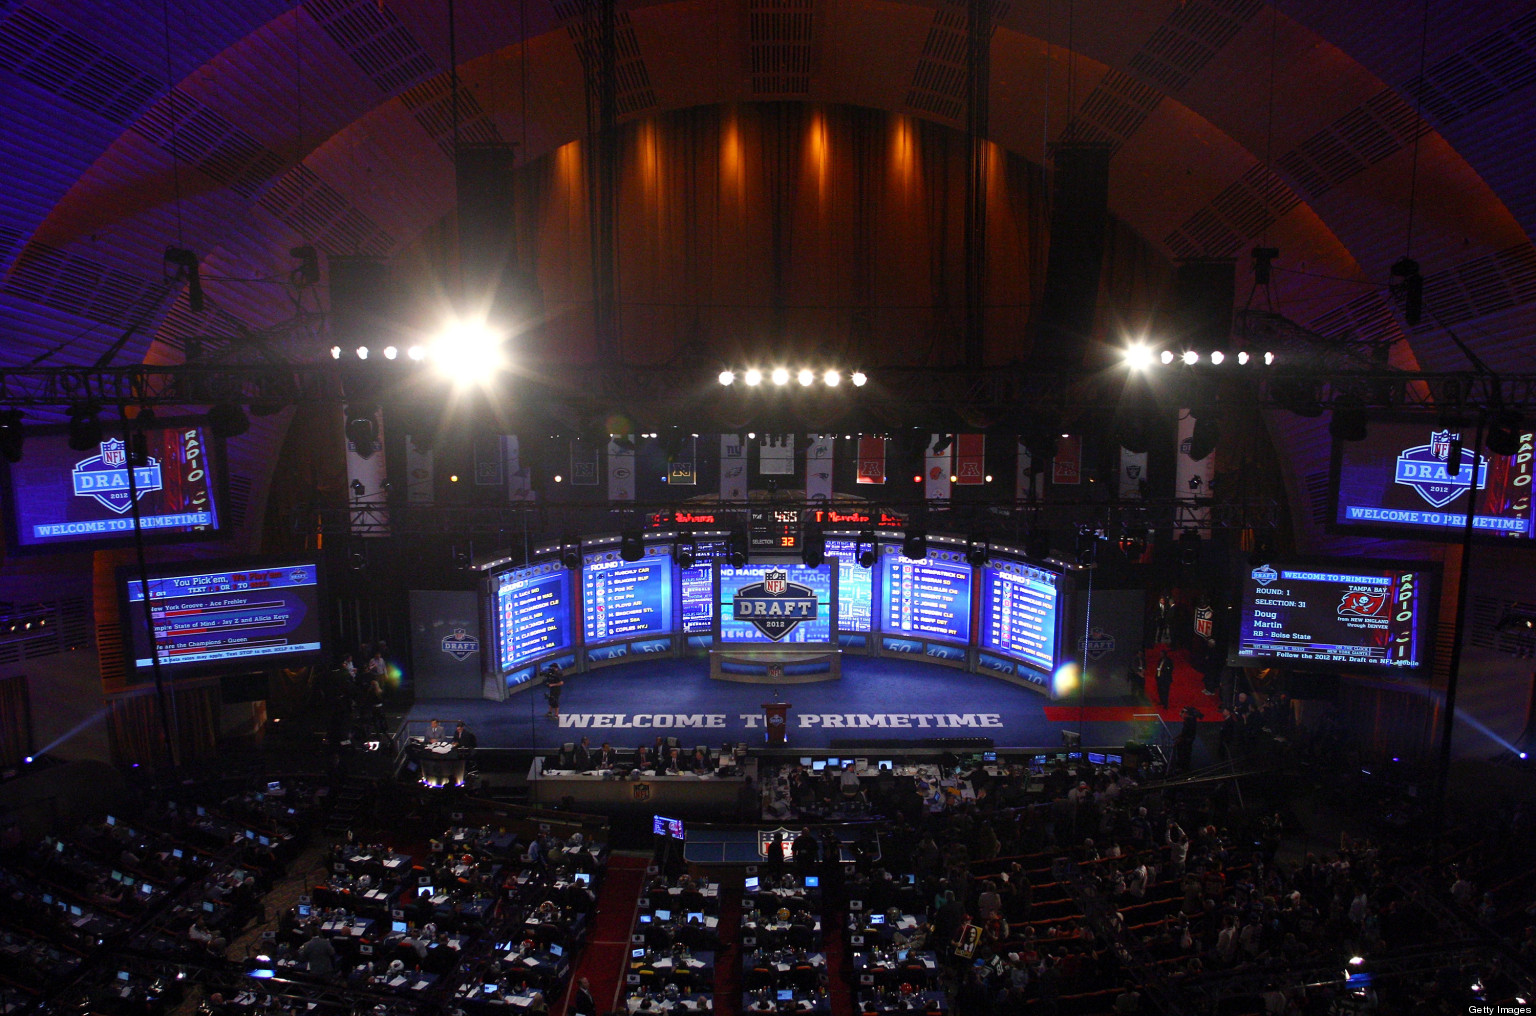 Share Nfl Draft Wallpaper Gallery To The